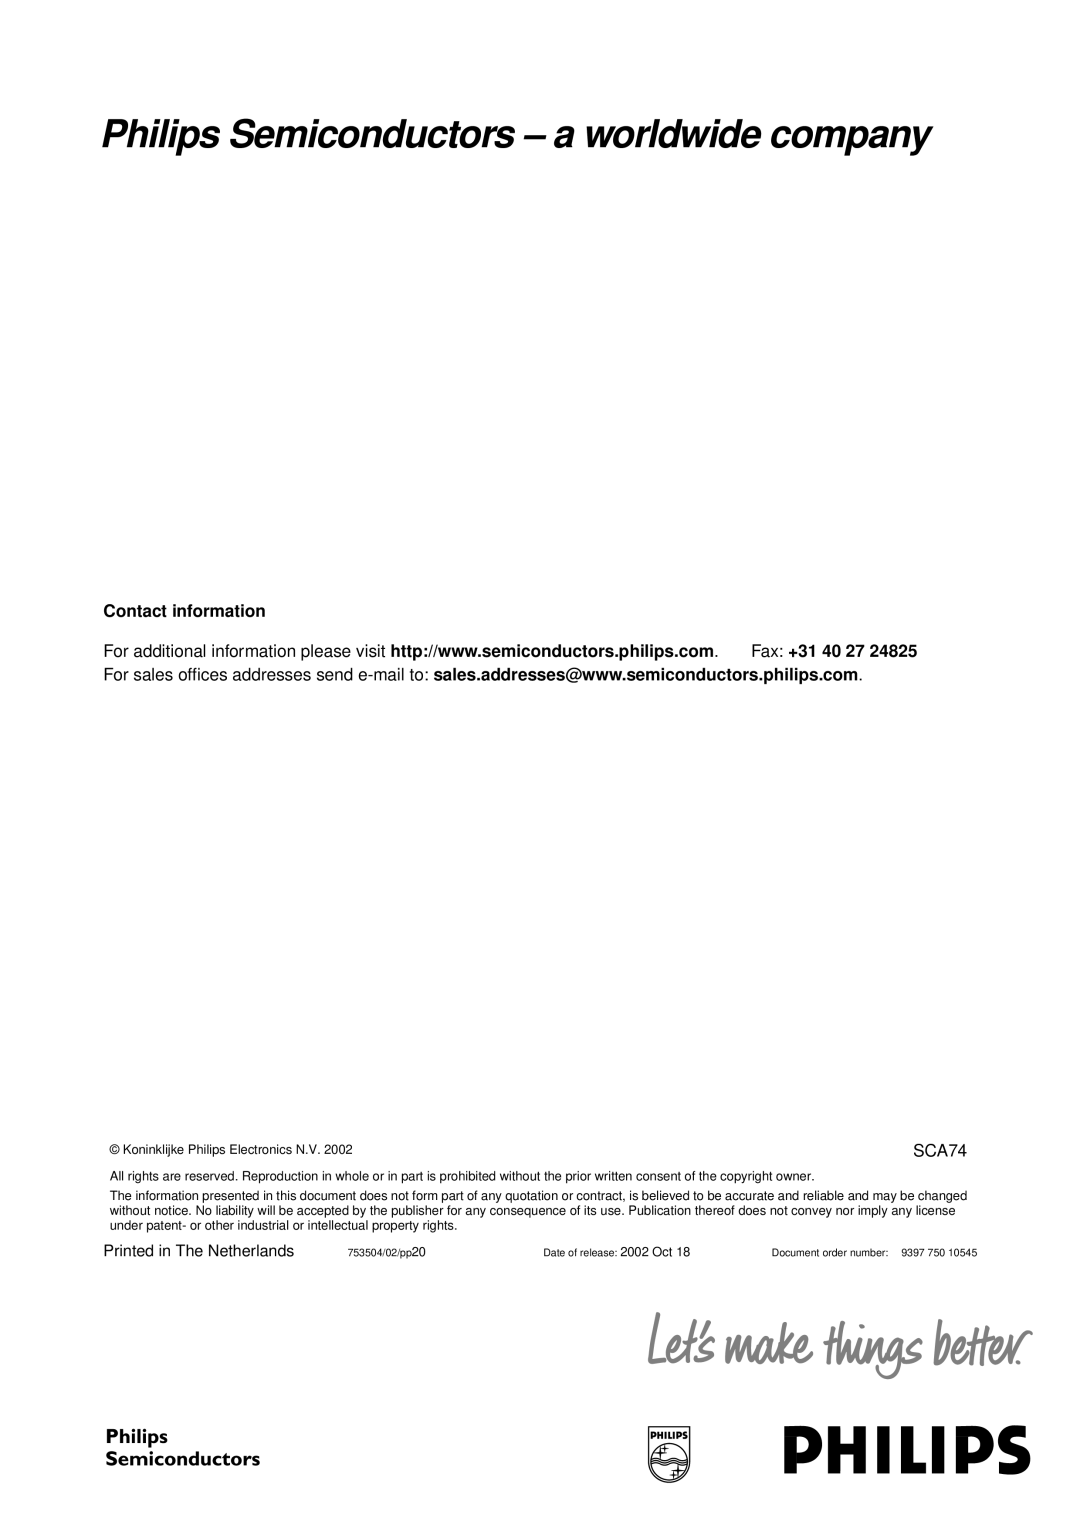 Philips TDA6107JF manual Contact information, Philips Semiconductors - a worldwide company, Fax +31 